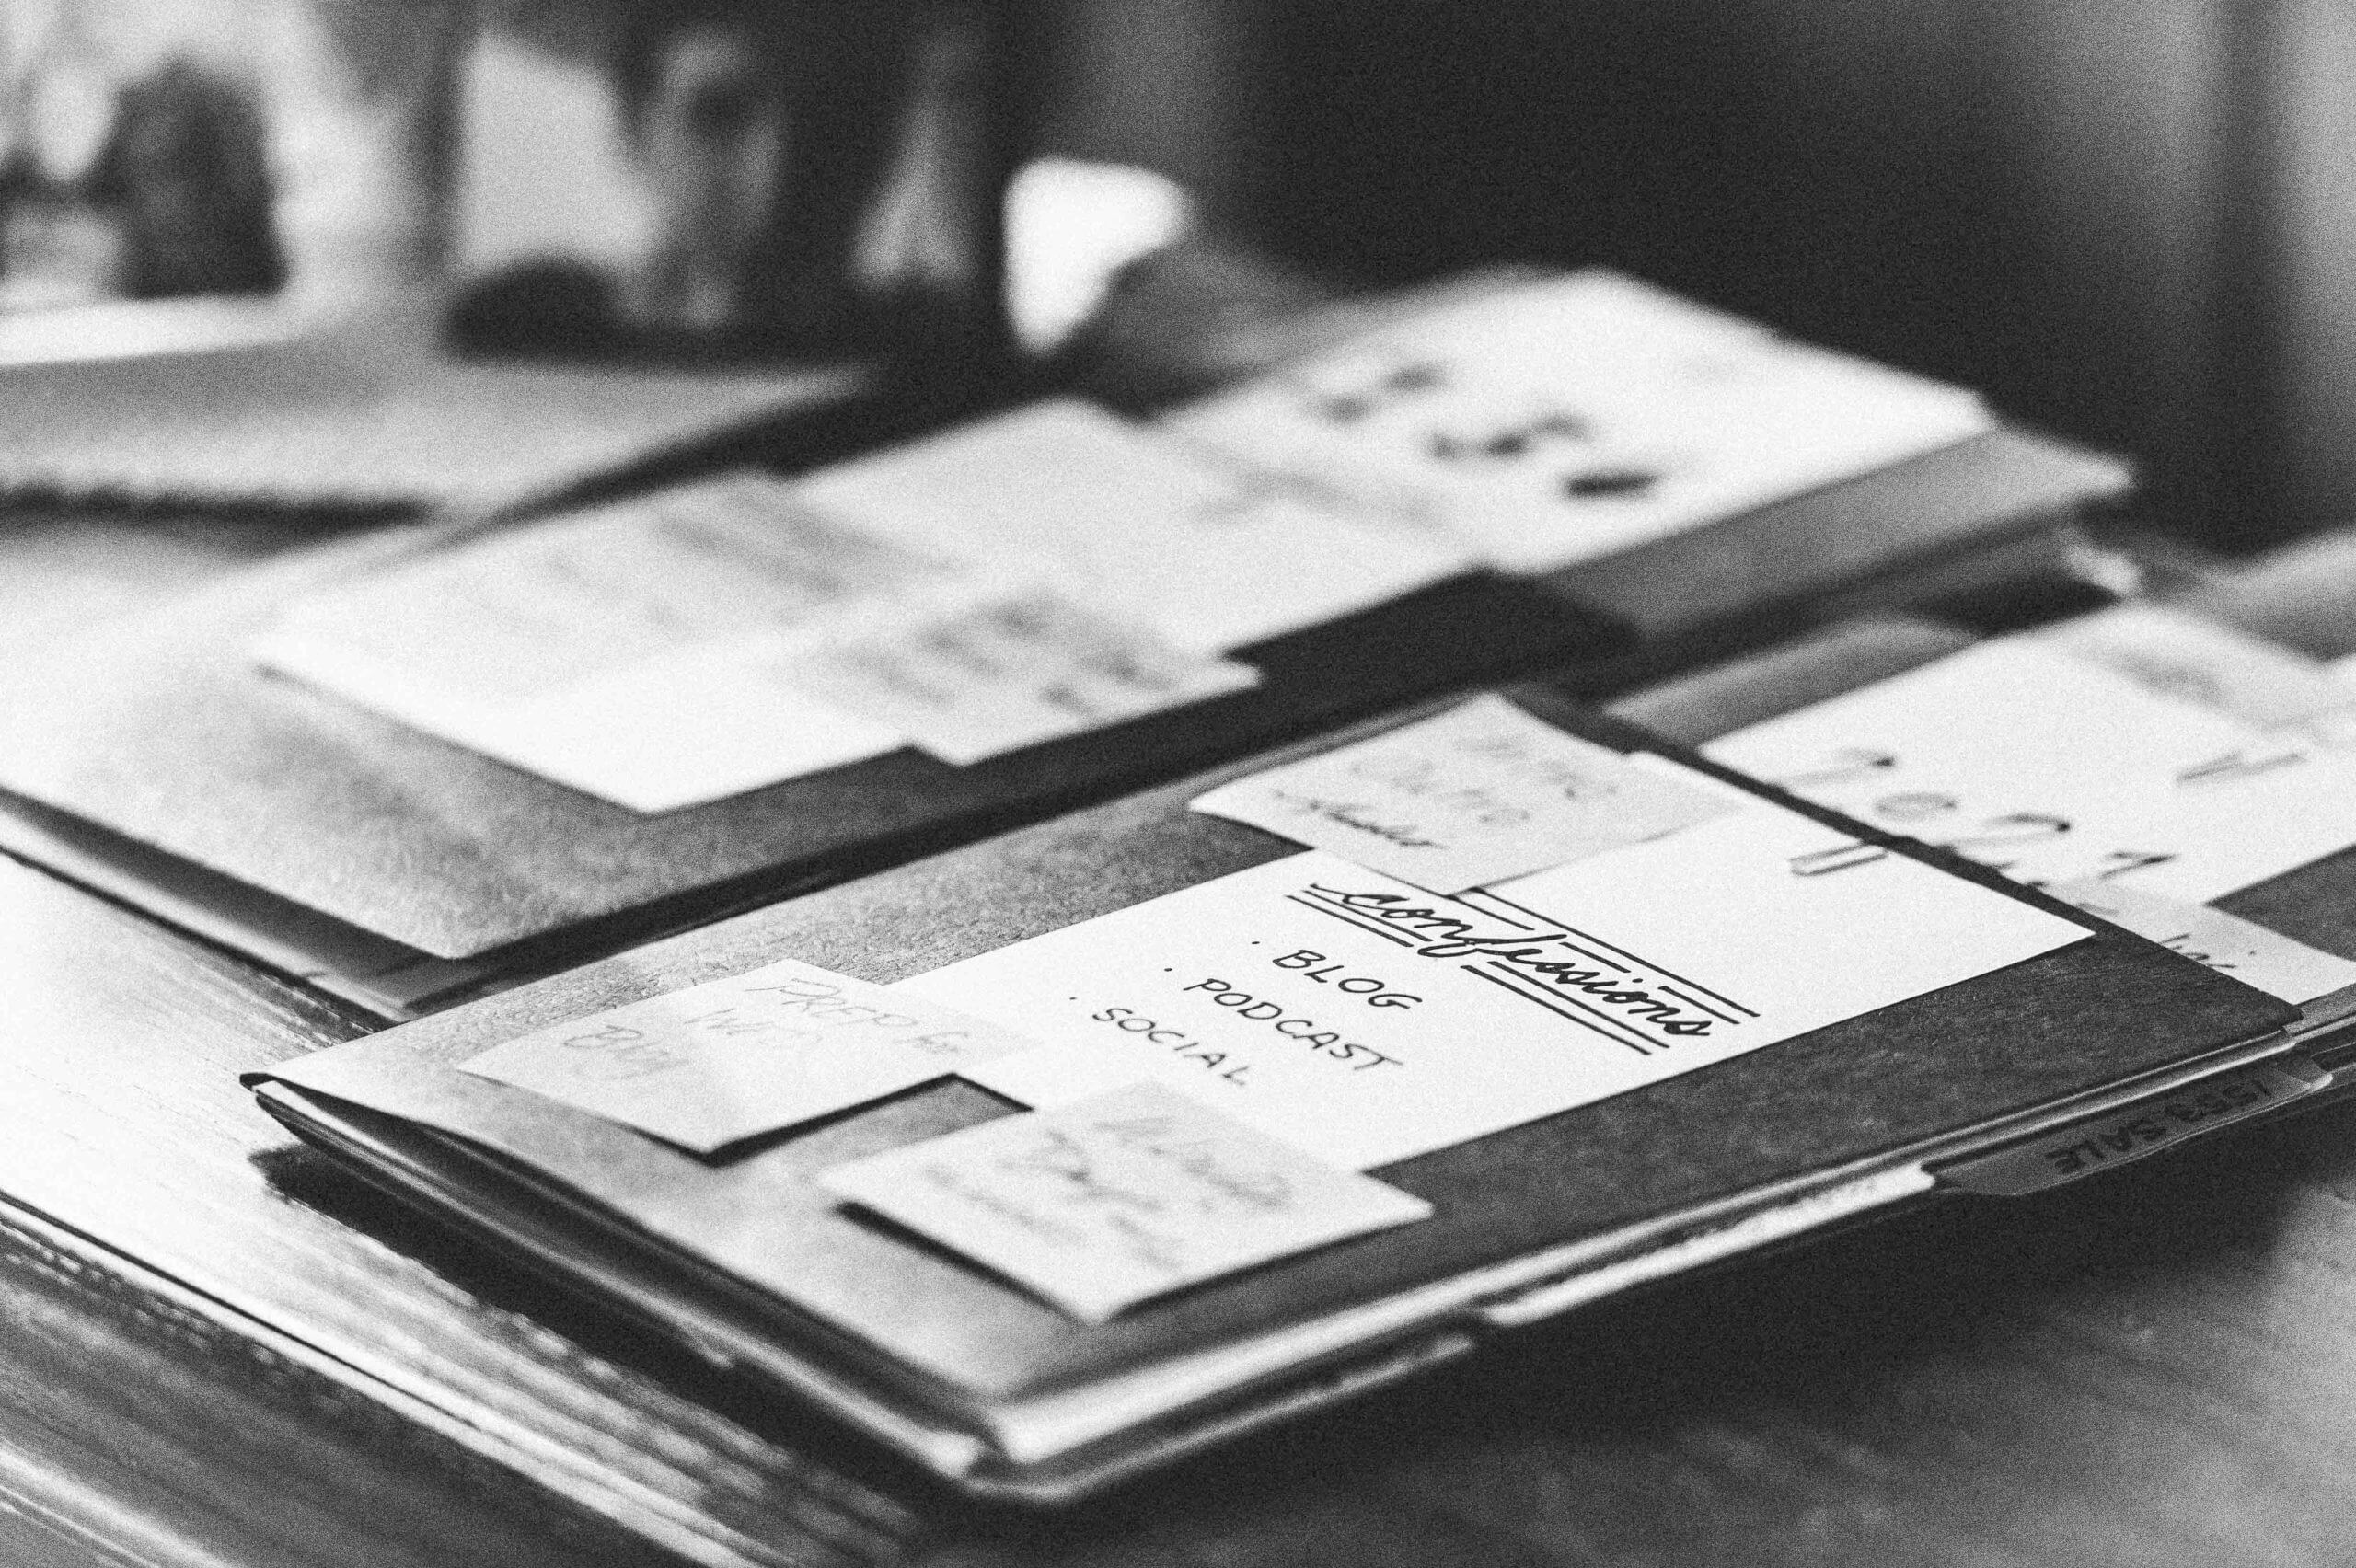 Black and white image of folders on a desk with 5x7 white note cards and post-it notes with writing on them.